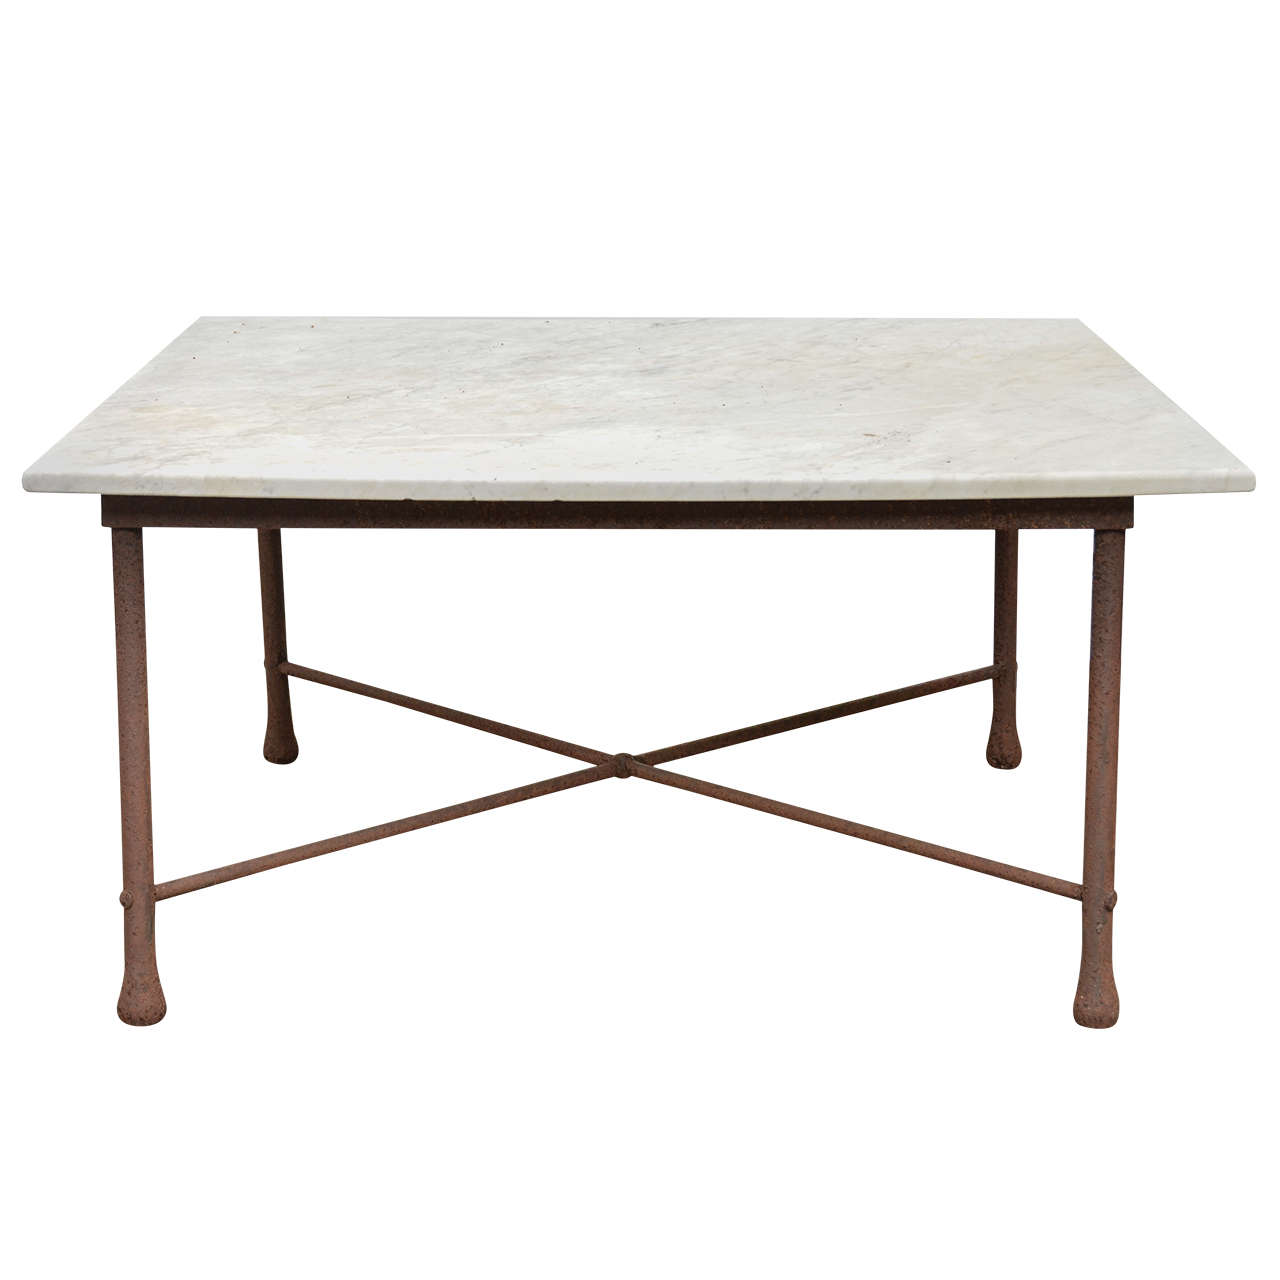 American 1970s Wrought Iron Coffee Table with Marble Top For Sale